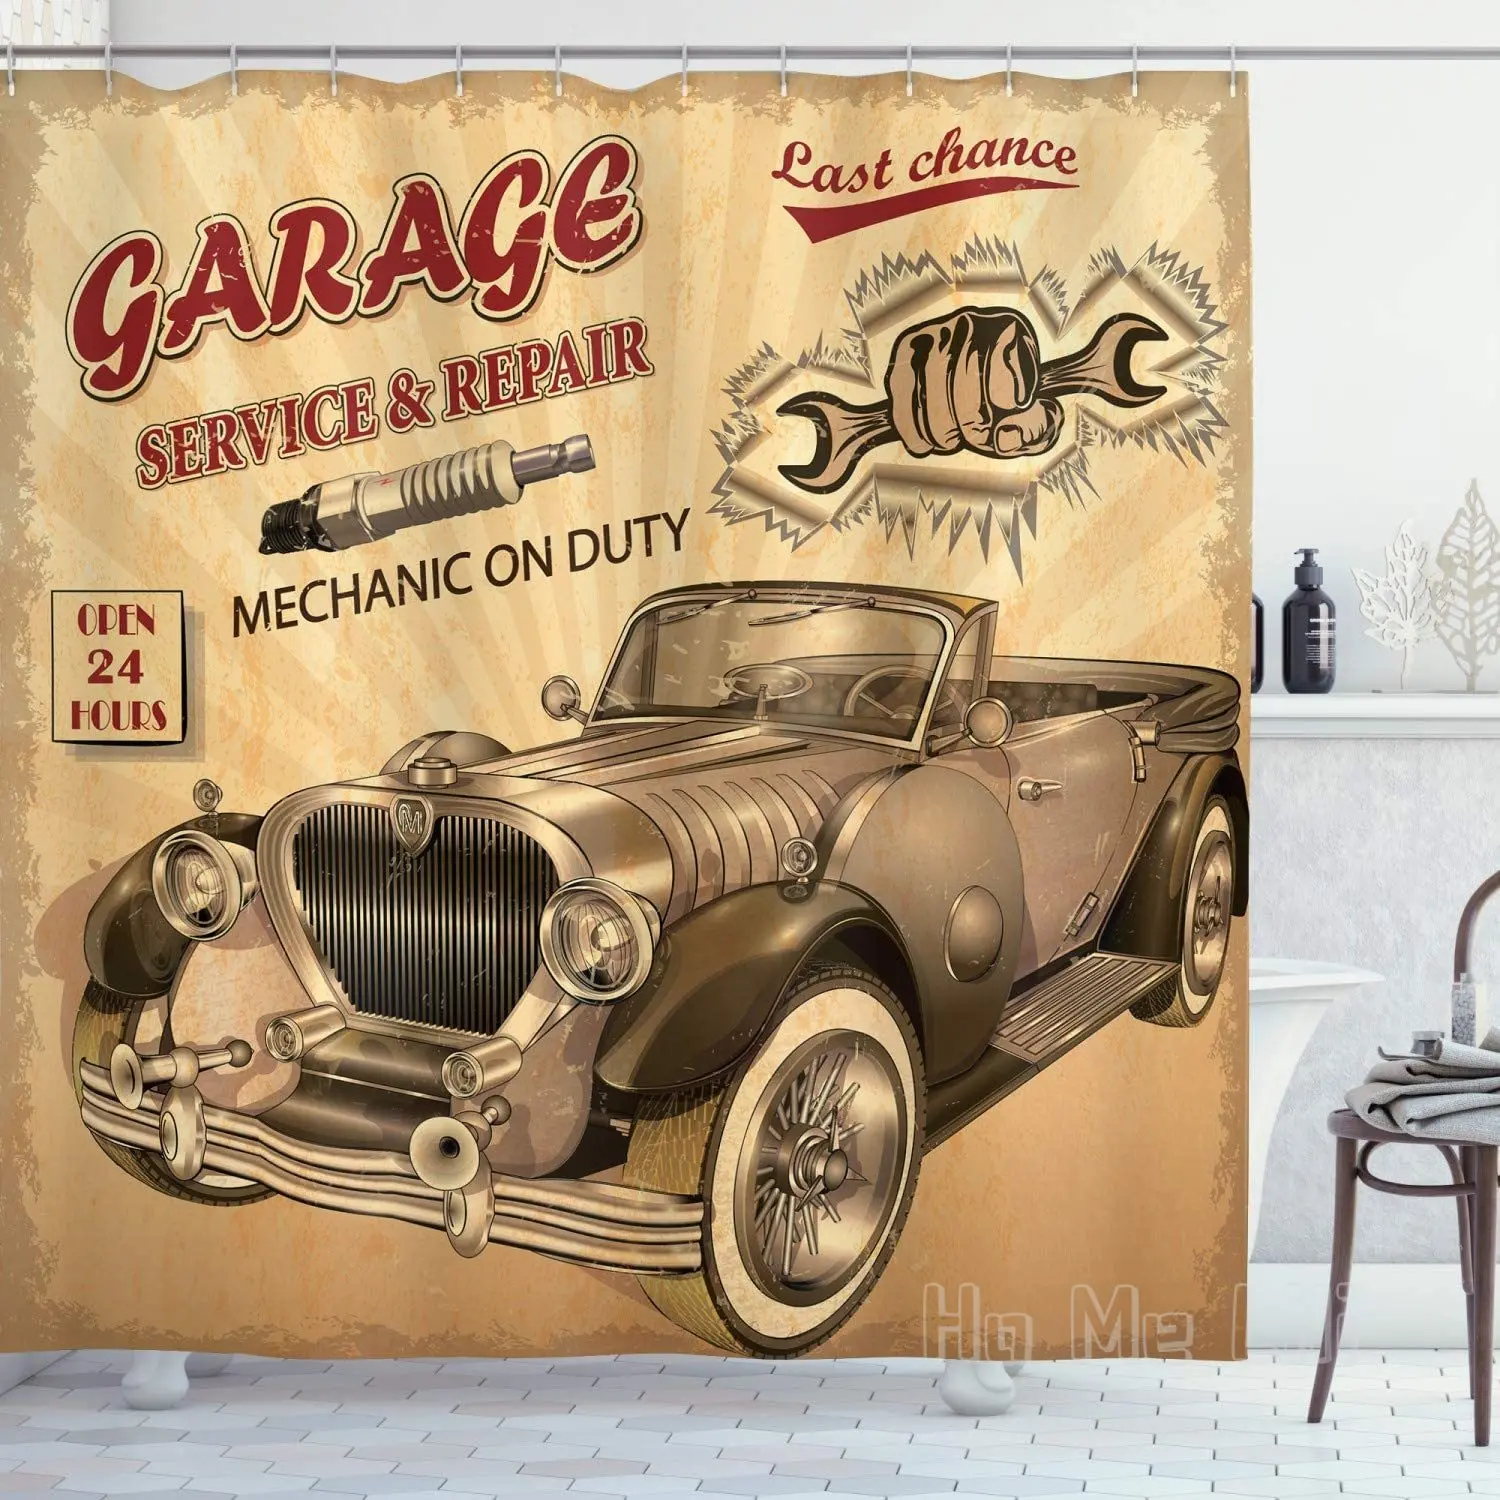 

Vintage Shower Curtain Nostalgic Car With Garage Service And Repair Store Phrase Dated Faded Print Bathroom Decor Set With Hooks